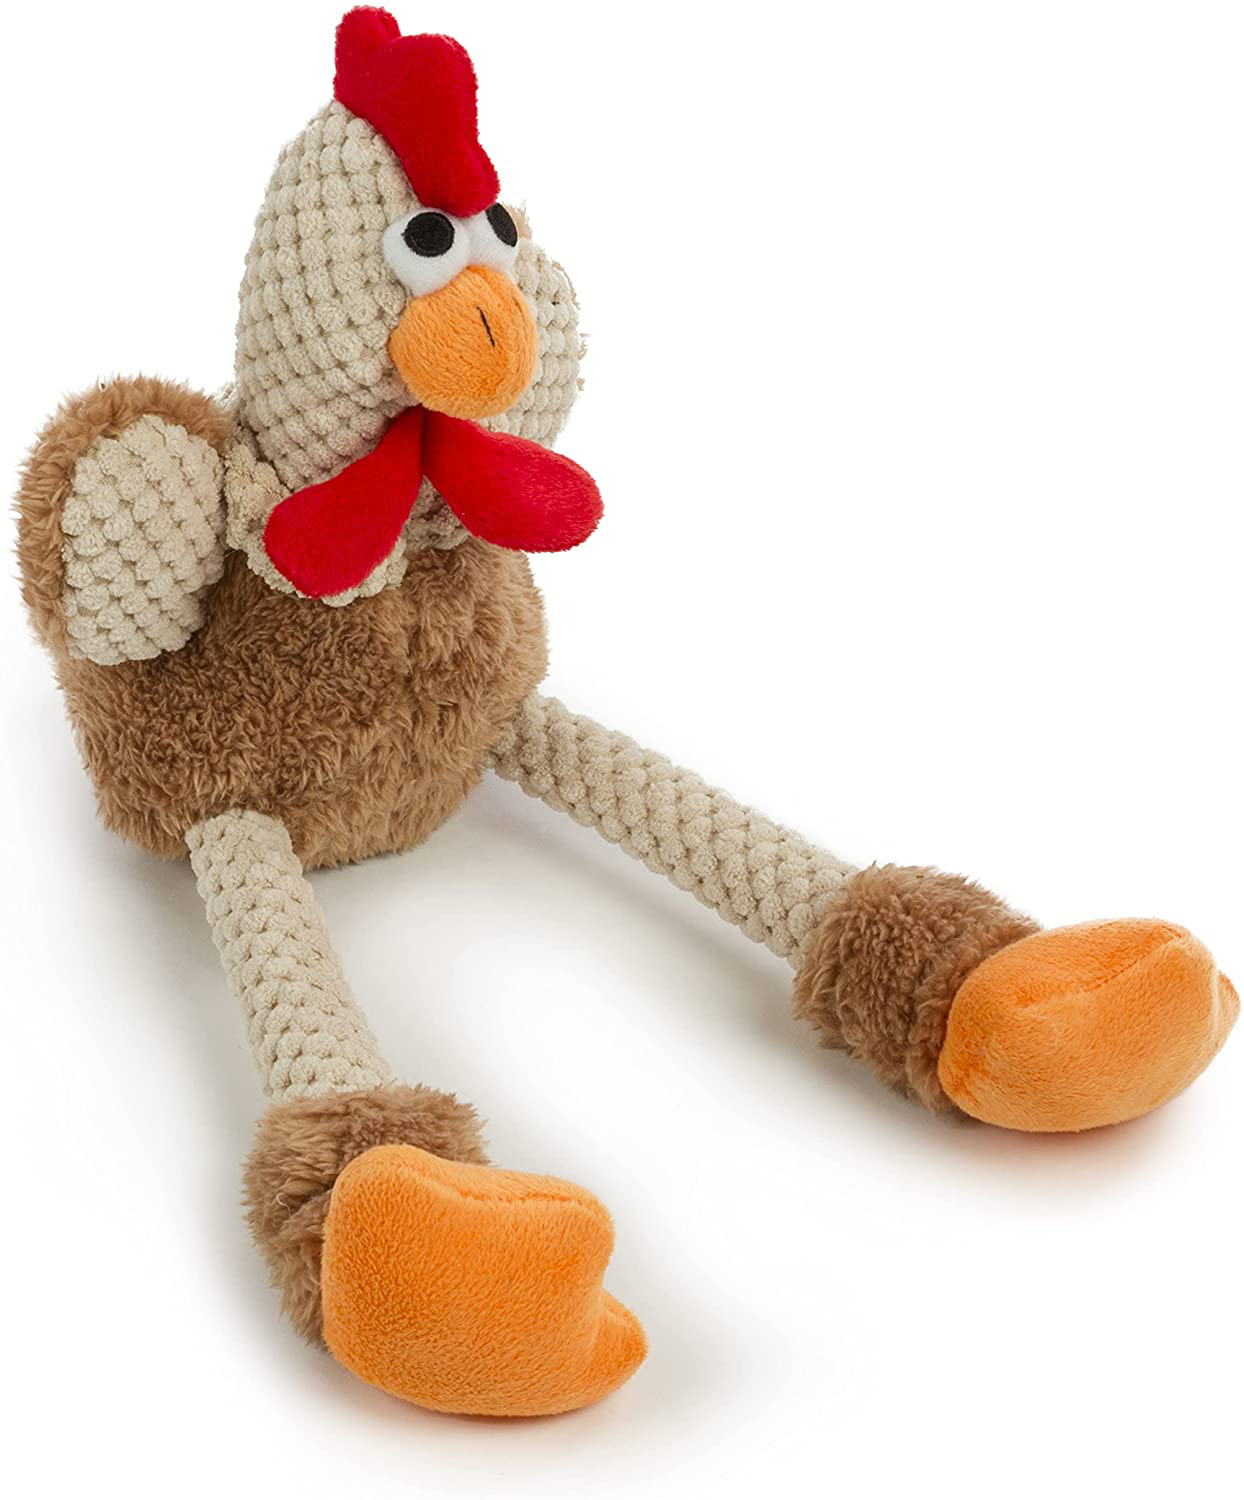 Godog Checkers Skinny Rooster with Chew Guard Technology Tough Plush Dog Toy,Brown, Large Animals & Pet Supplies > Pet Supplies > Dog Supplies > Dog Toys goDog   